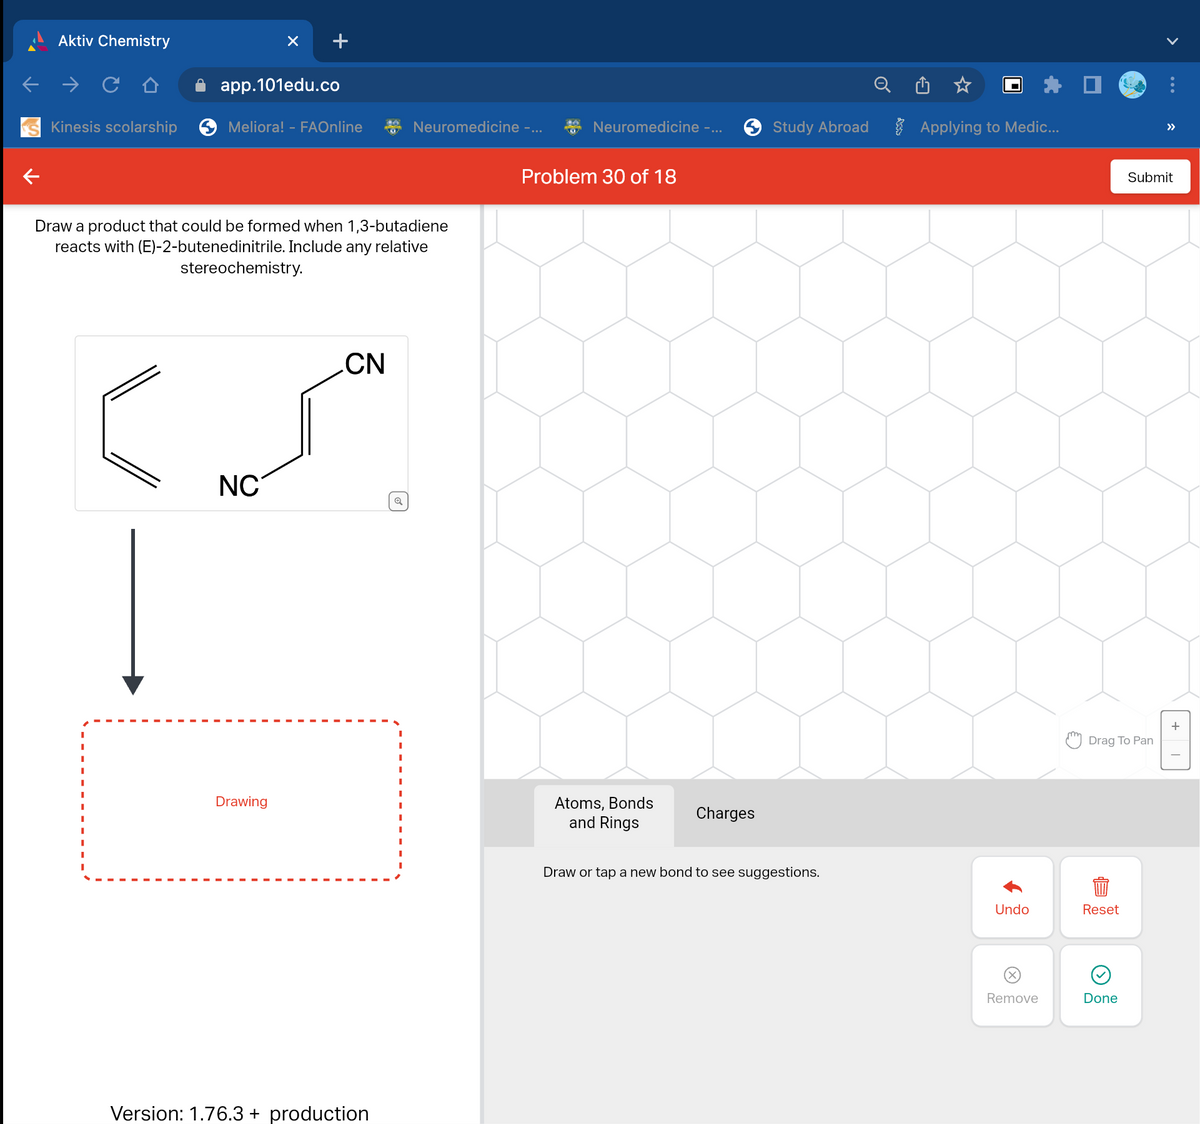 Aktiv Chemistry
Kinesis scolarship
app.101edu.co
I
Meliora! - FAOnline
Draw a product that could be formed when 1,3-butadiene
reacts with (E)-2-butenedinitrile. Include any relative
stereochemistry.
NC
Drawing
CN
Neuromedicine -...
Version: 1.76.3 + production
Neuromedicine -...
Problem 30 of 18
Atoms, Bonds
and Rings
Charges
Study Abroad
Draw or tap a new bond to see suggestions.
Applying to Medic...
Undo
Remove
Drag To Pan
Reset
Submit
Done
+